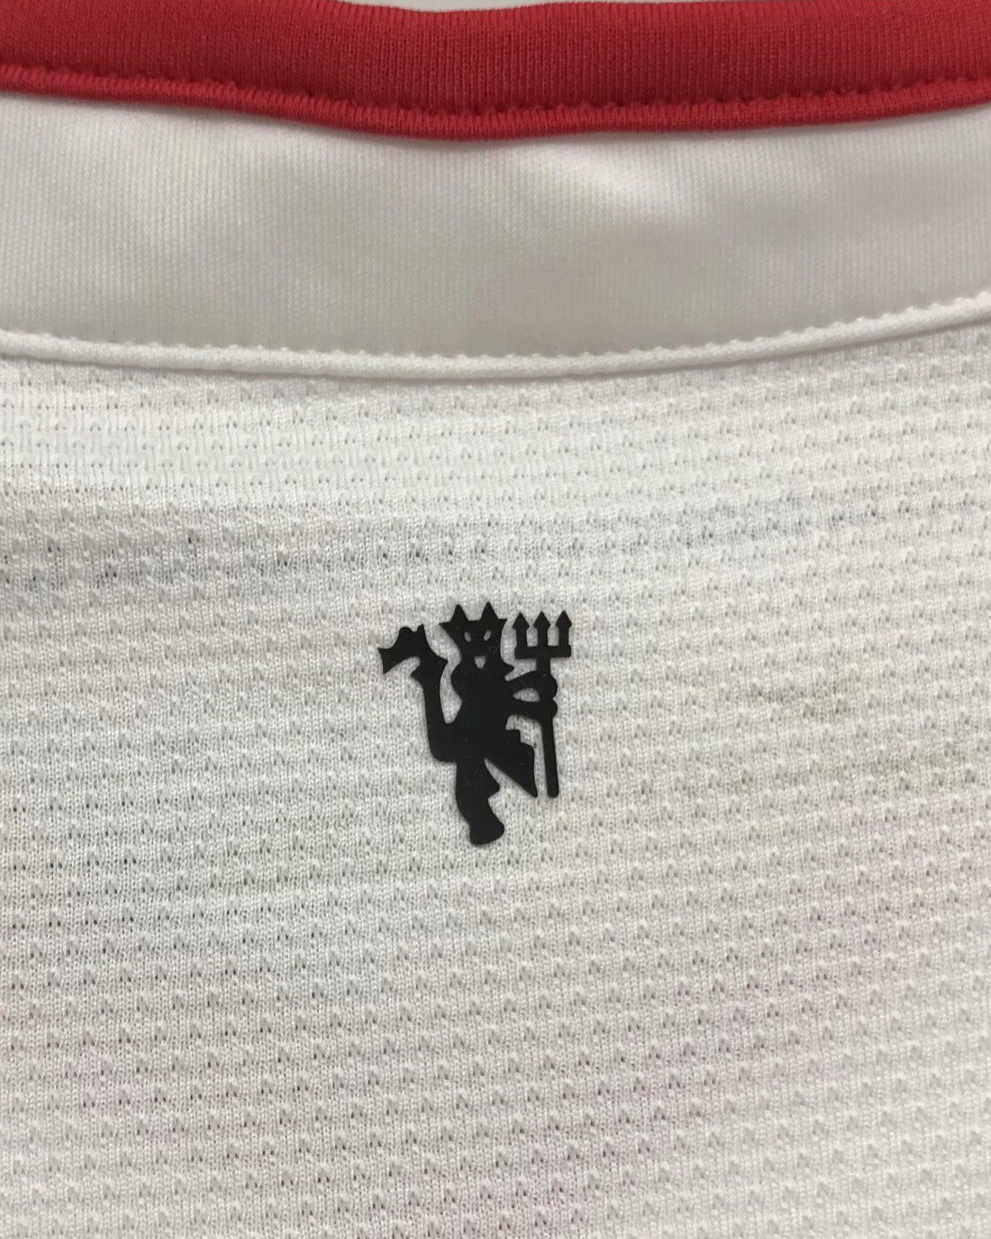 Manchester United 2013/14 Away White Jersey